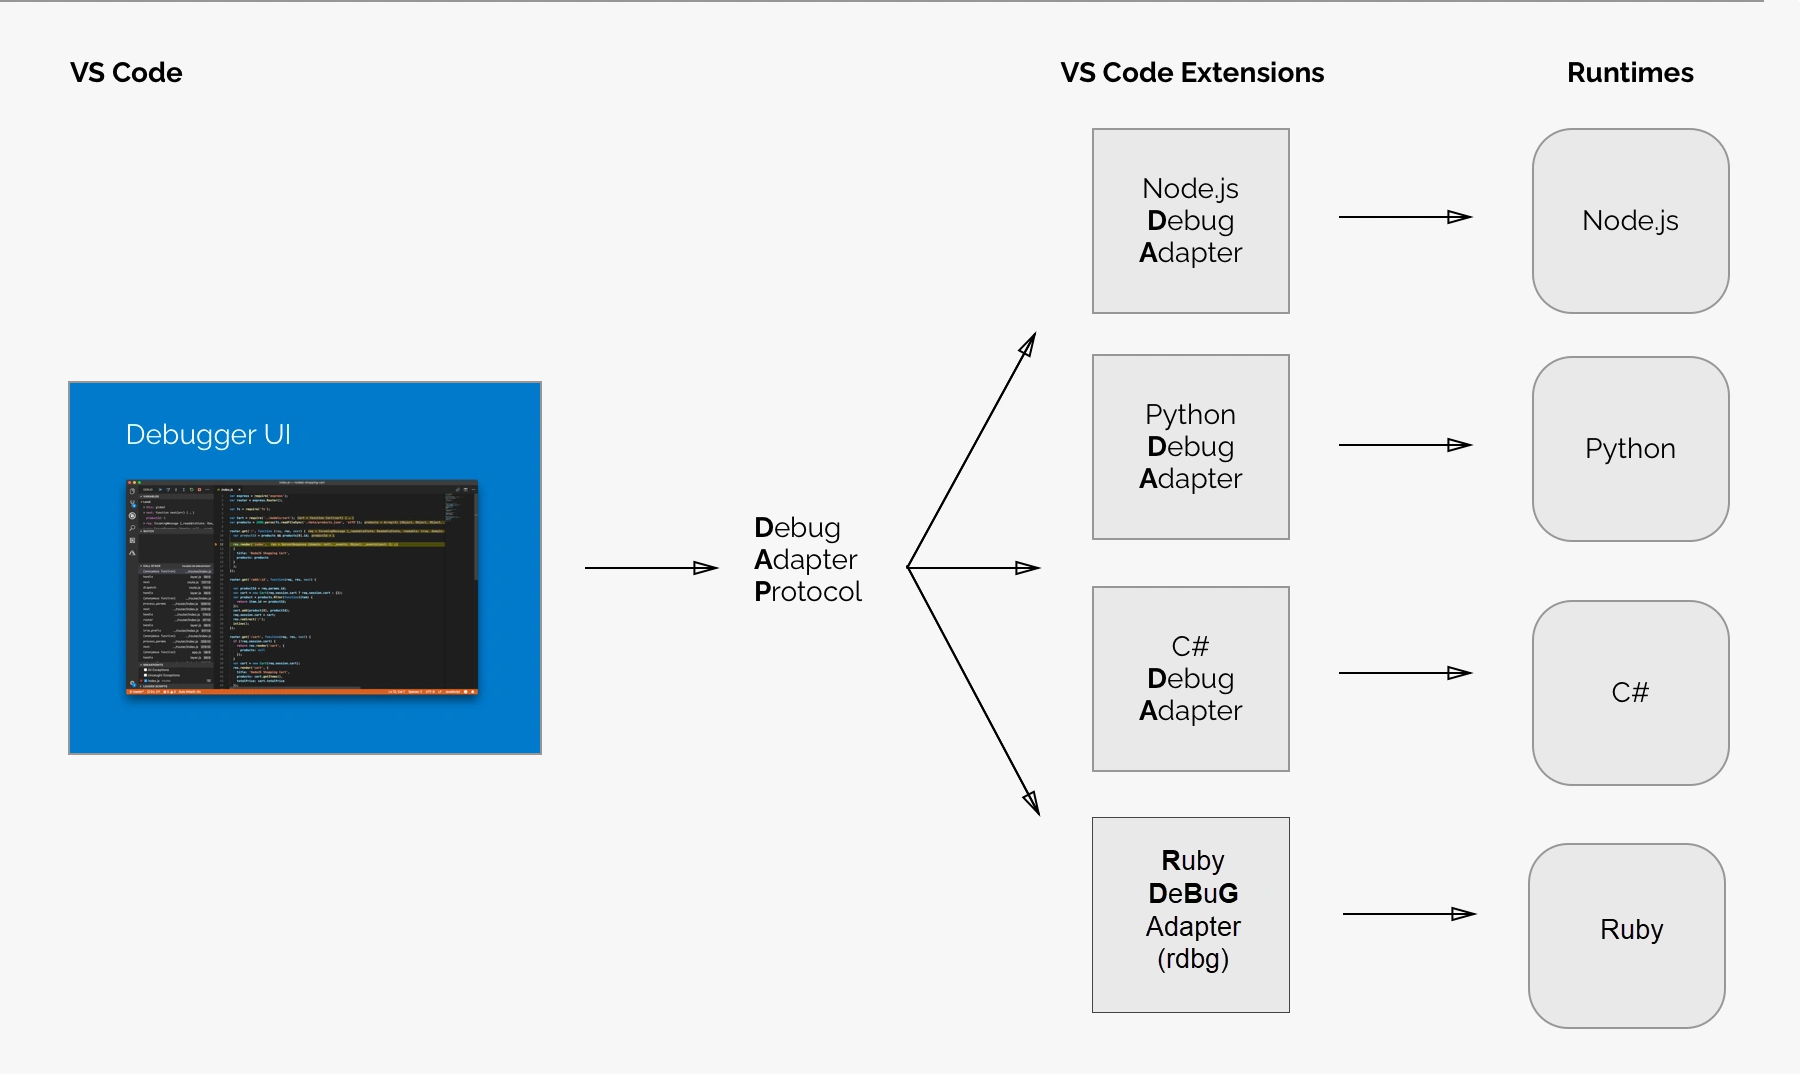 Enhanced version of diagram taken from 'Introducing Logpoints and auto-attach' from the Visual Studio Code documentation